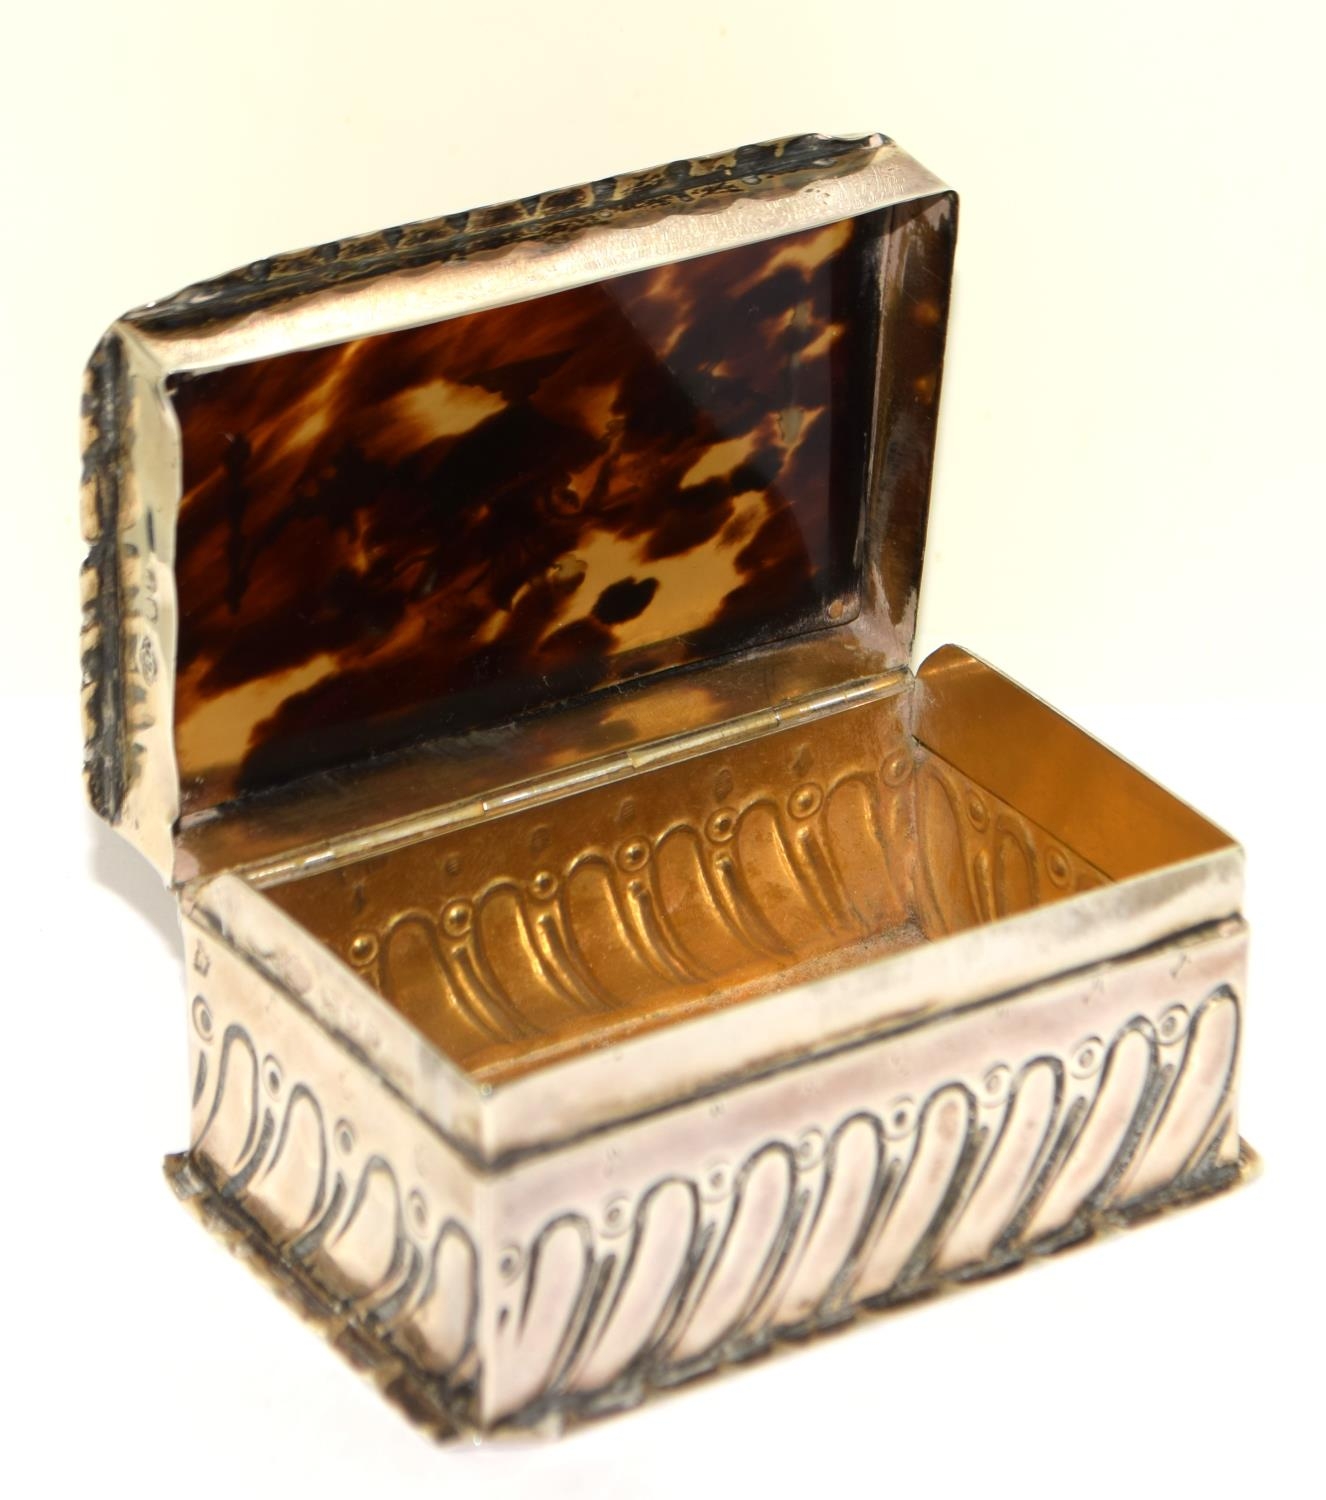 Silver small table top pill box set with Tortoise shell and MOP decorative lid 4x7x5cm - Image 4 of 6